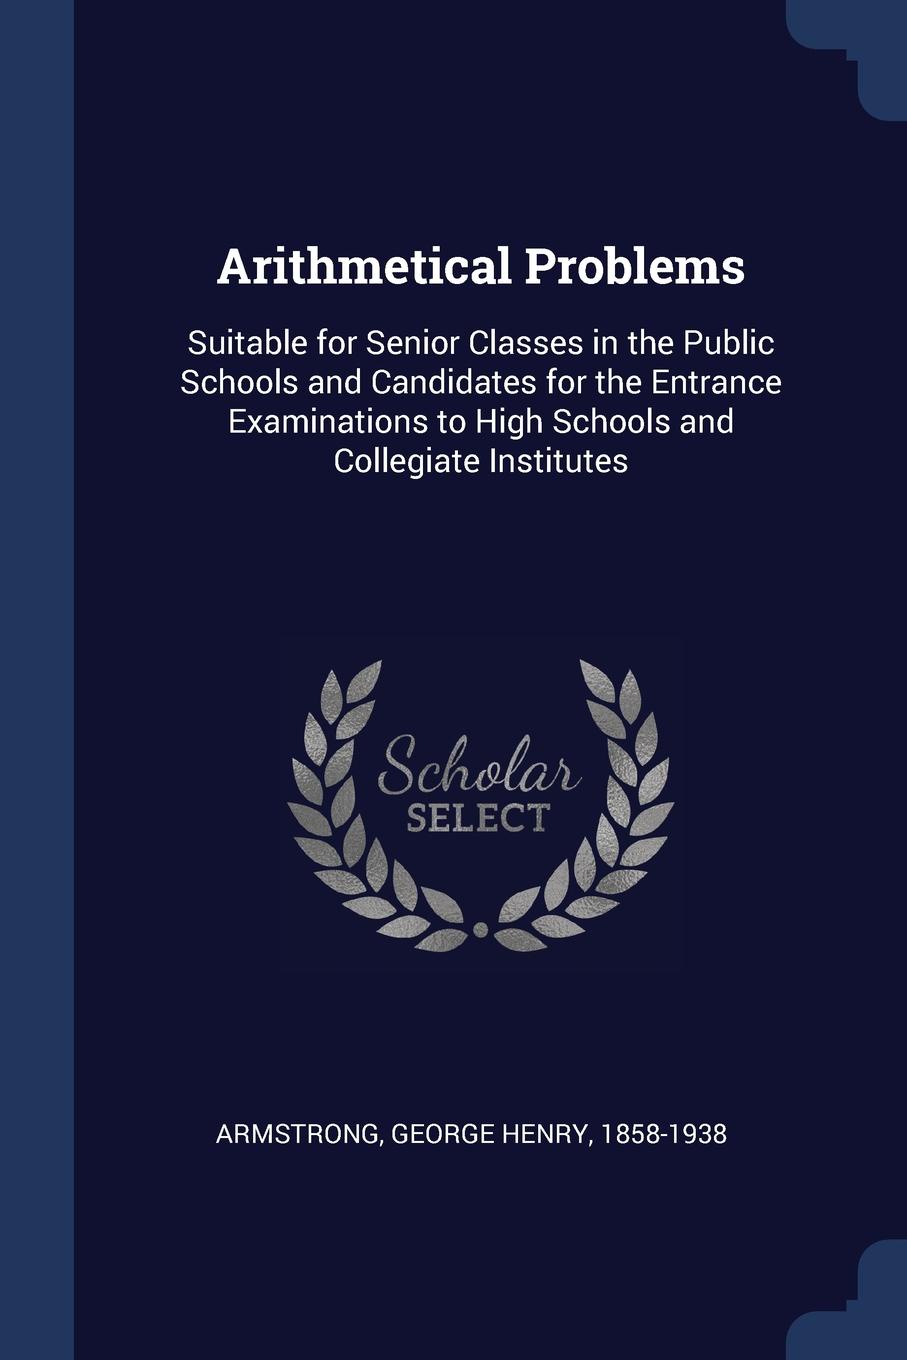 Arithmetical Problems. Suitable for Senior Classes in the Public Schools and Candidates for the Entrance Examinations to High Schools and Collegiate Institutes